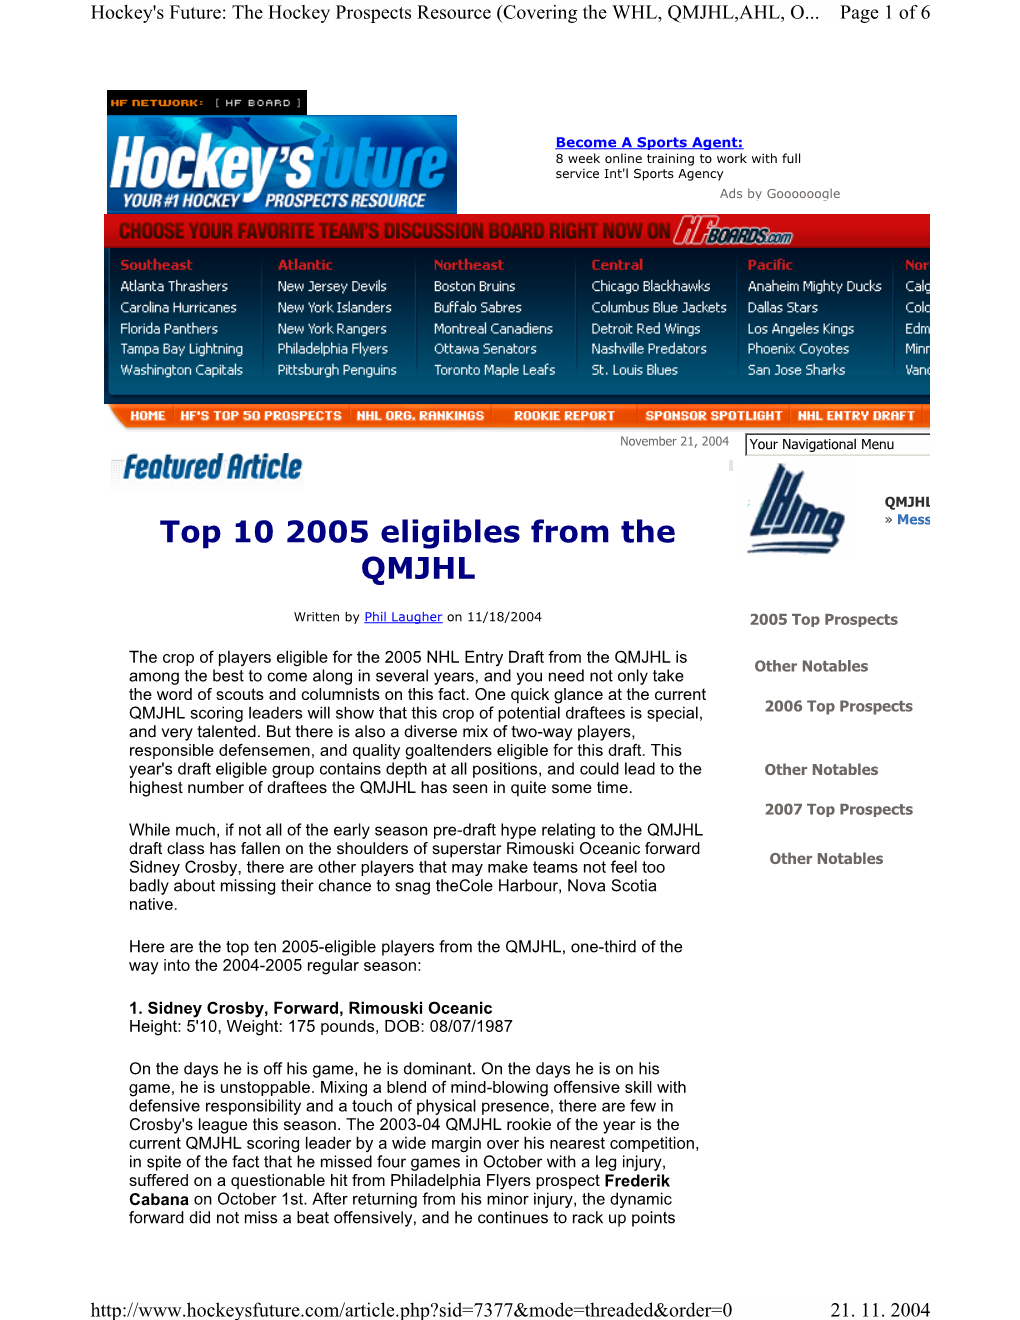 Top 10 2005 Eligibles from the QMJHL